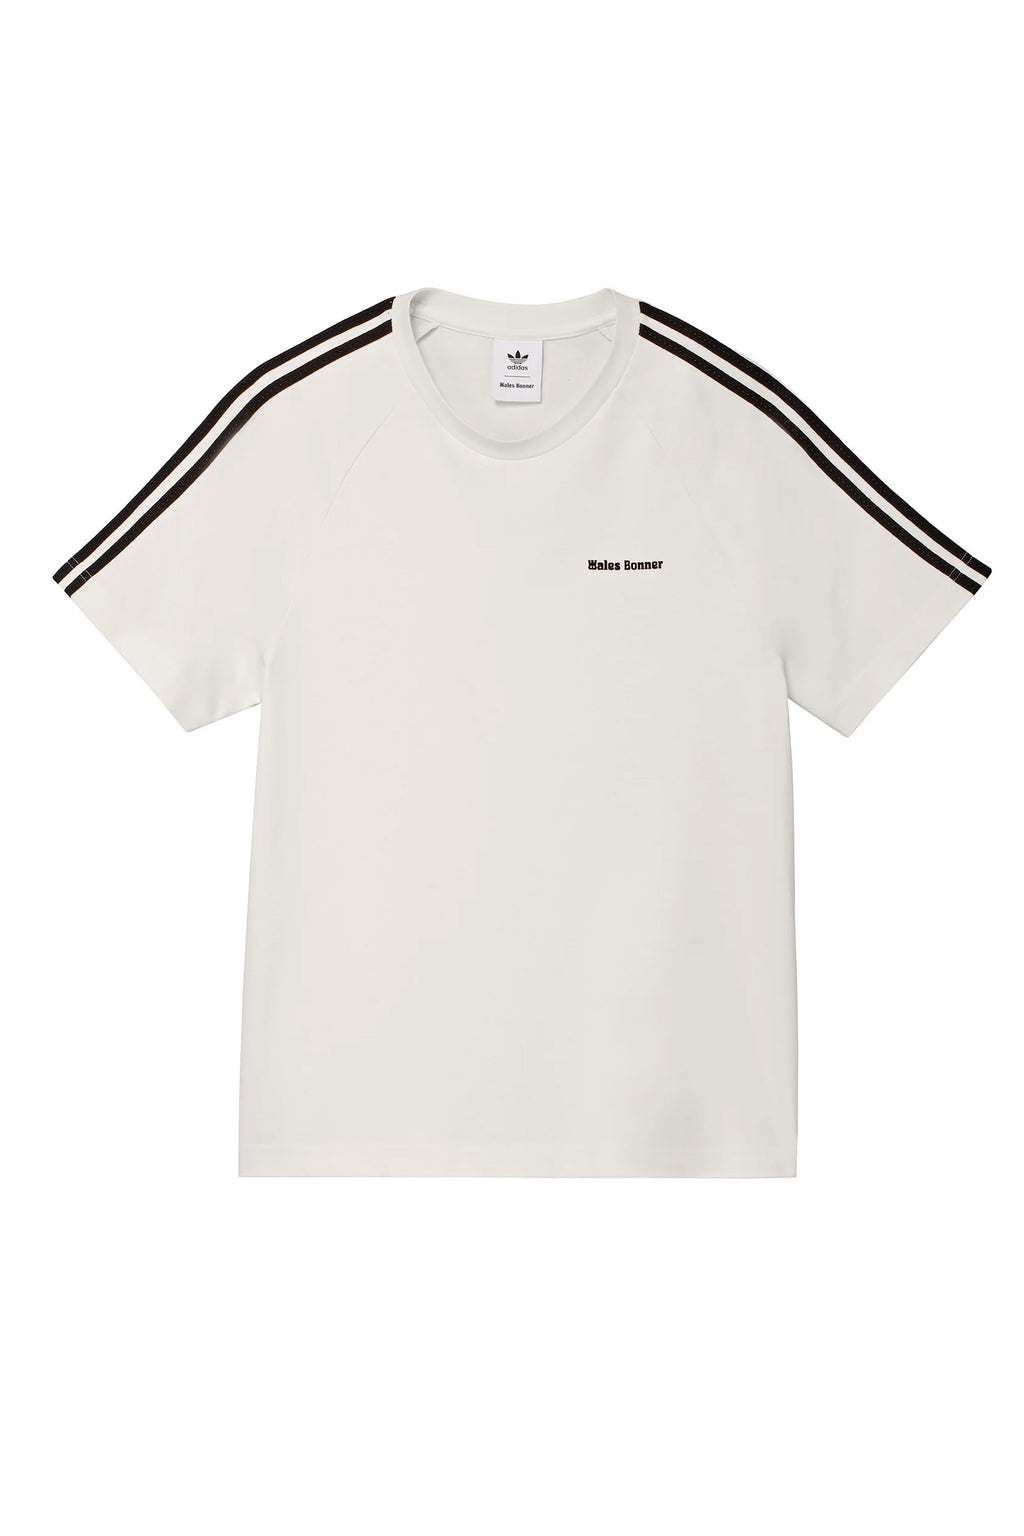 ADIDAS ORIGINALS BY WALES NUBIAN BONNER WB / FW23 - WHT TEE S/S